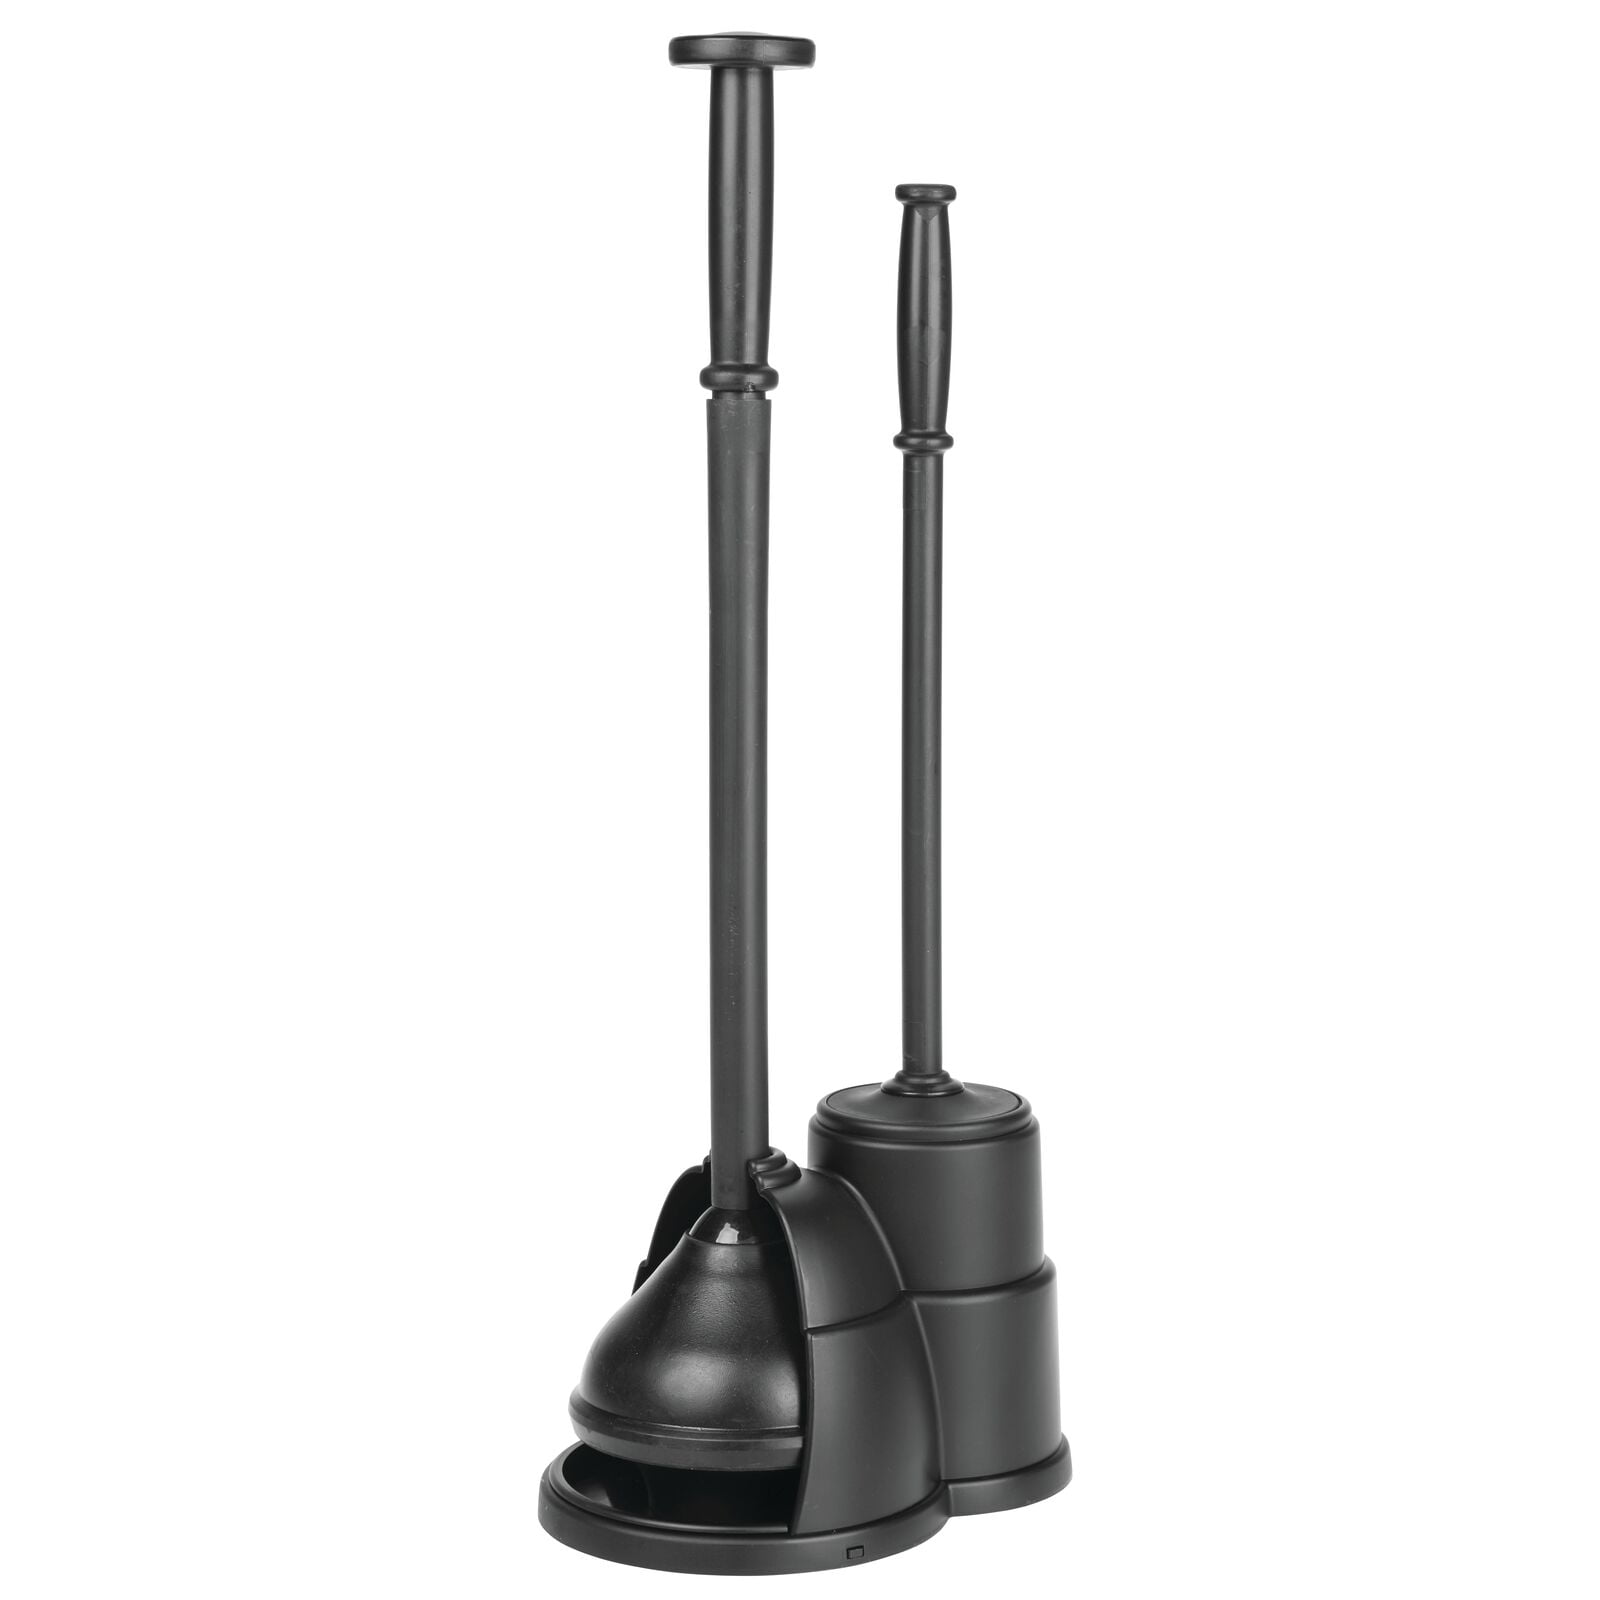 MR.SIGA Toilet Plungers & Holders And Bowl Brush Combo For Bathroom Cleaning, 